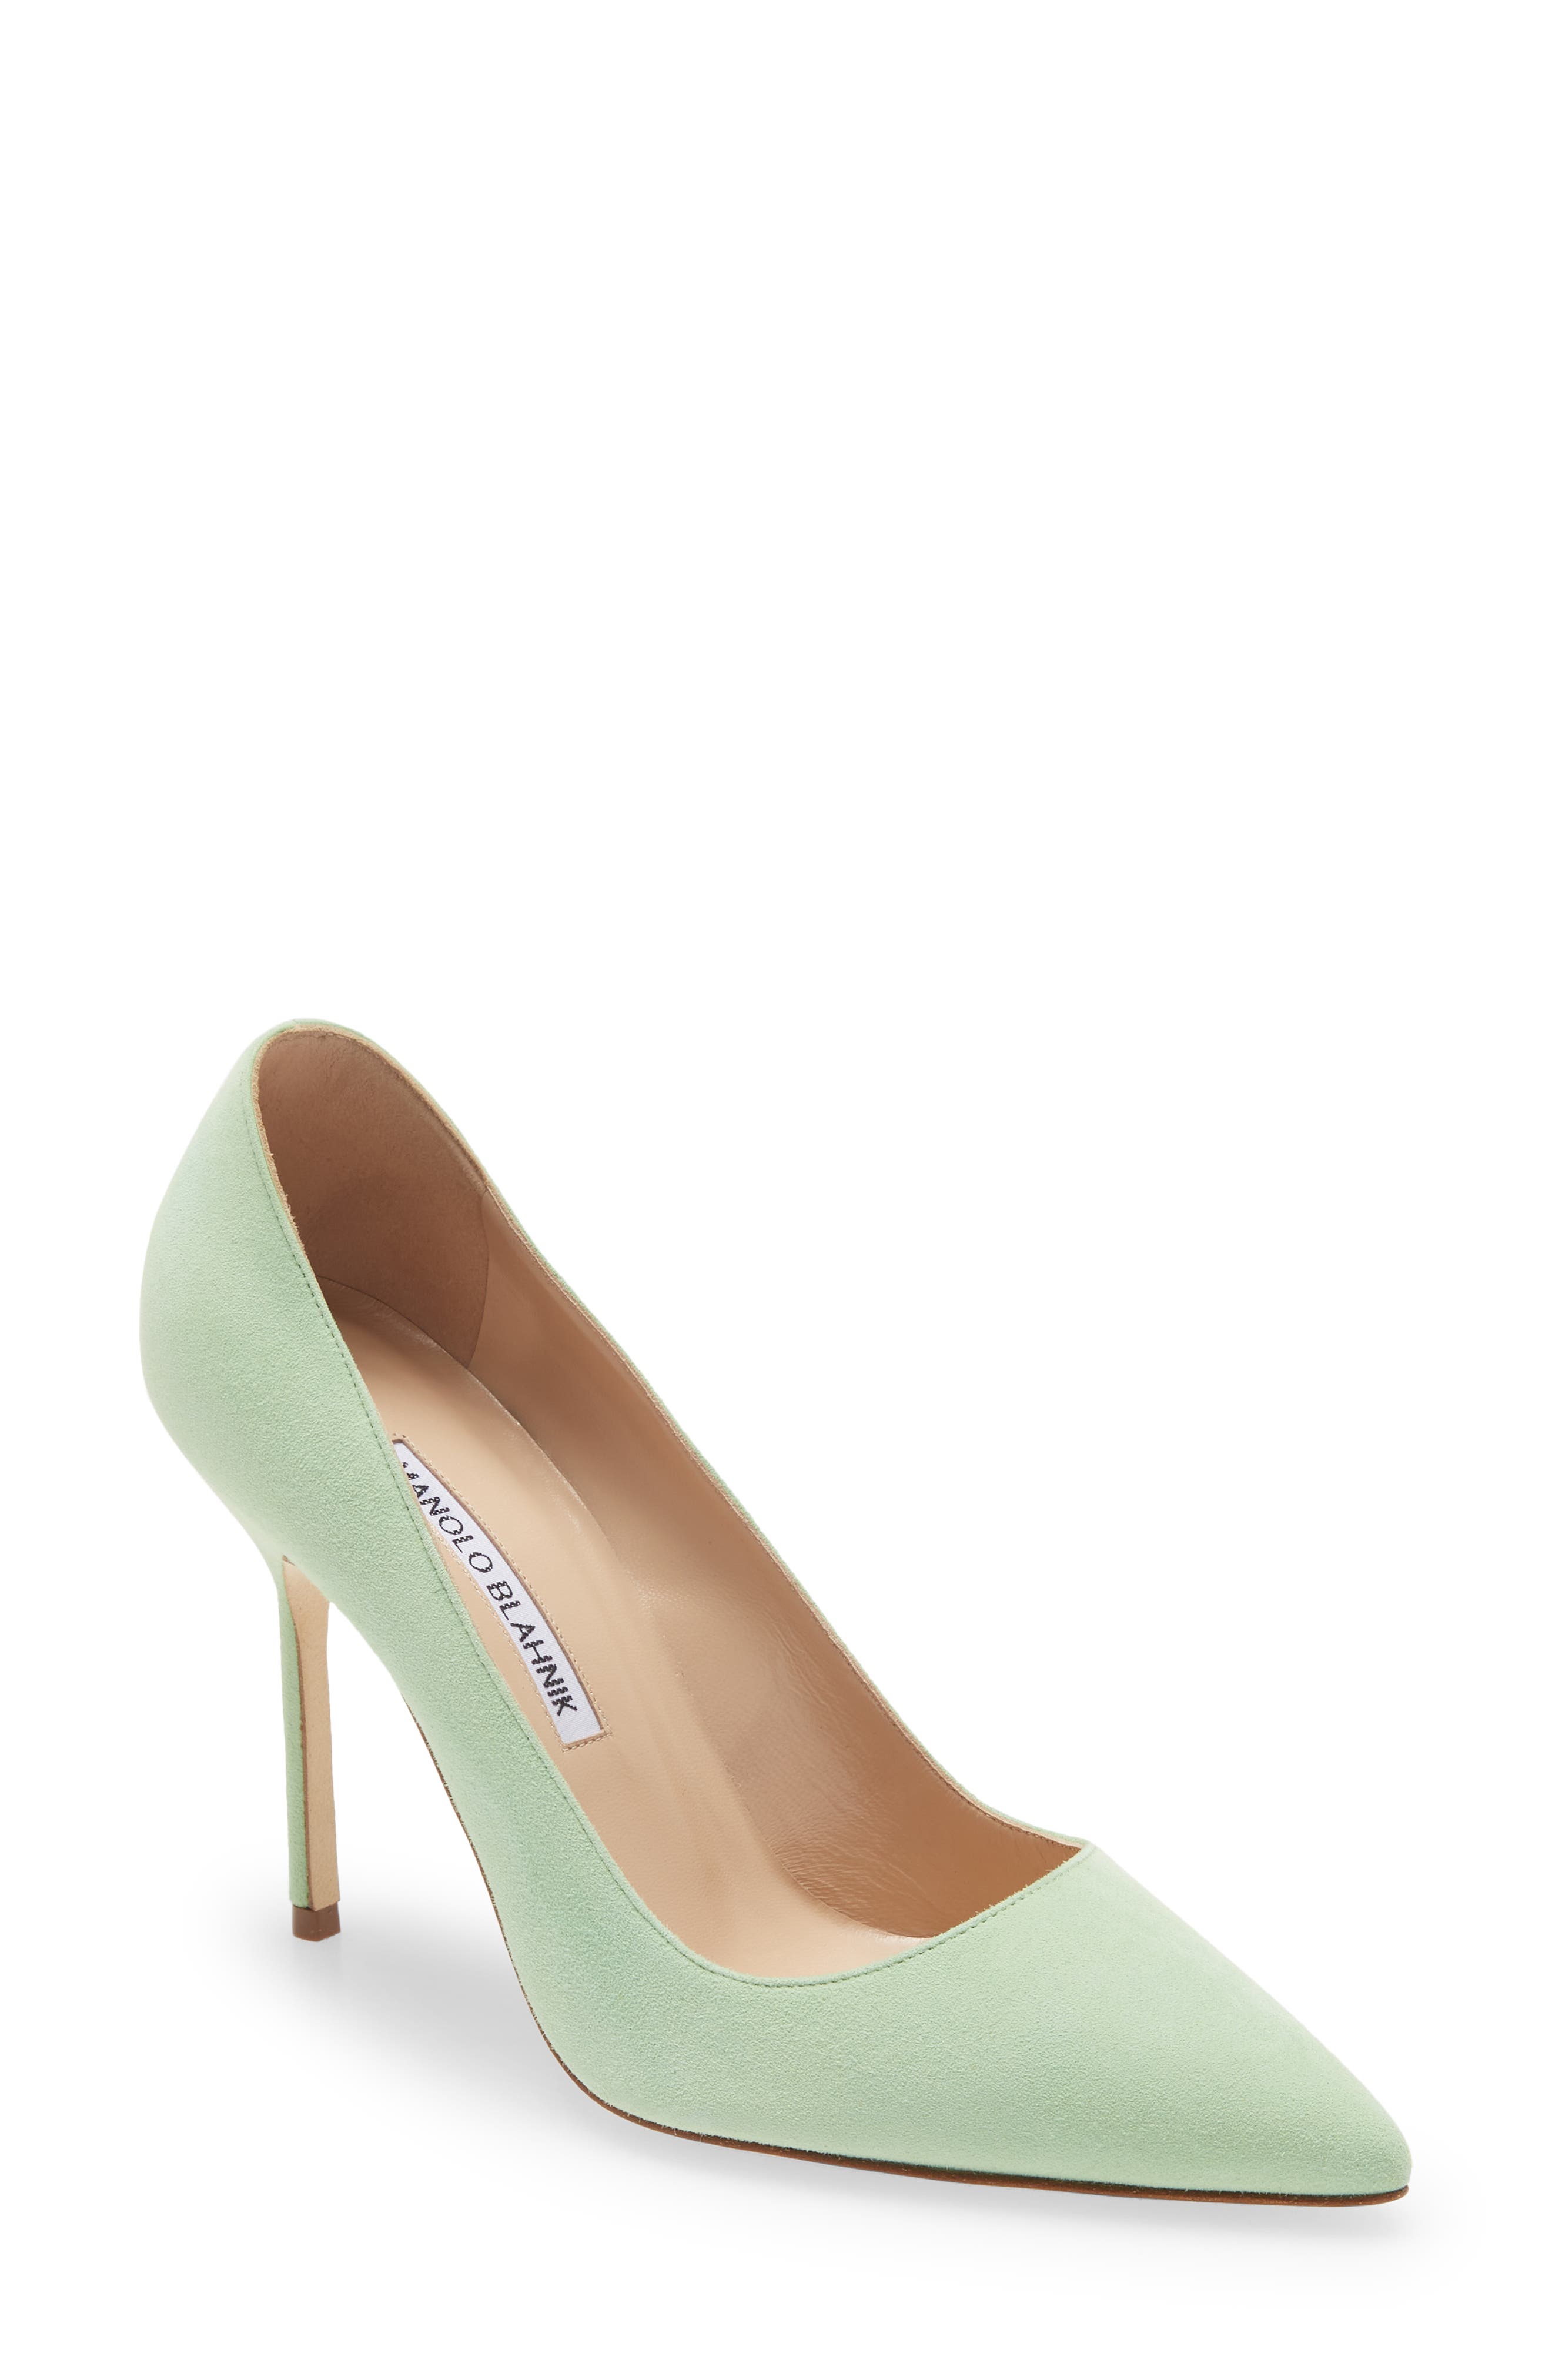 Manolo Blahnik BB Pointed Toe Pump in Green at Nordstrom, Size 5Us